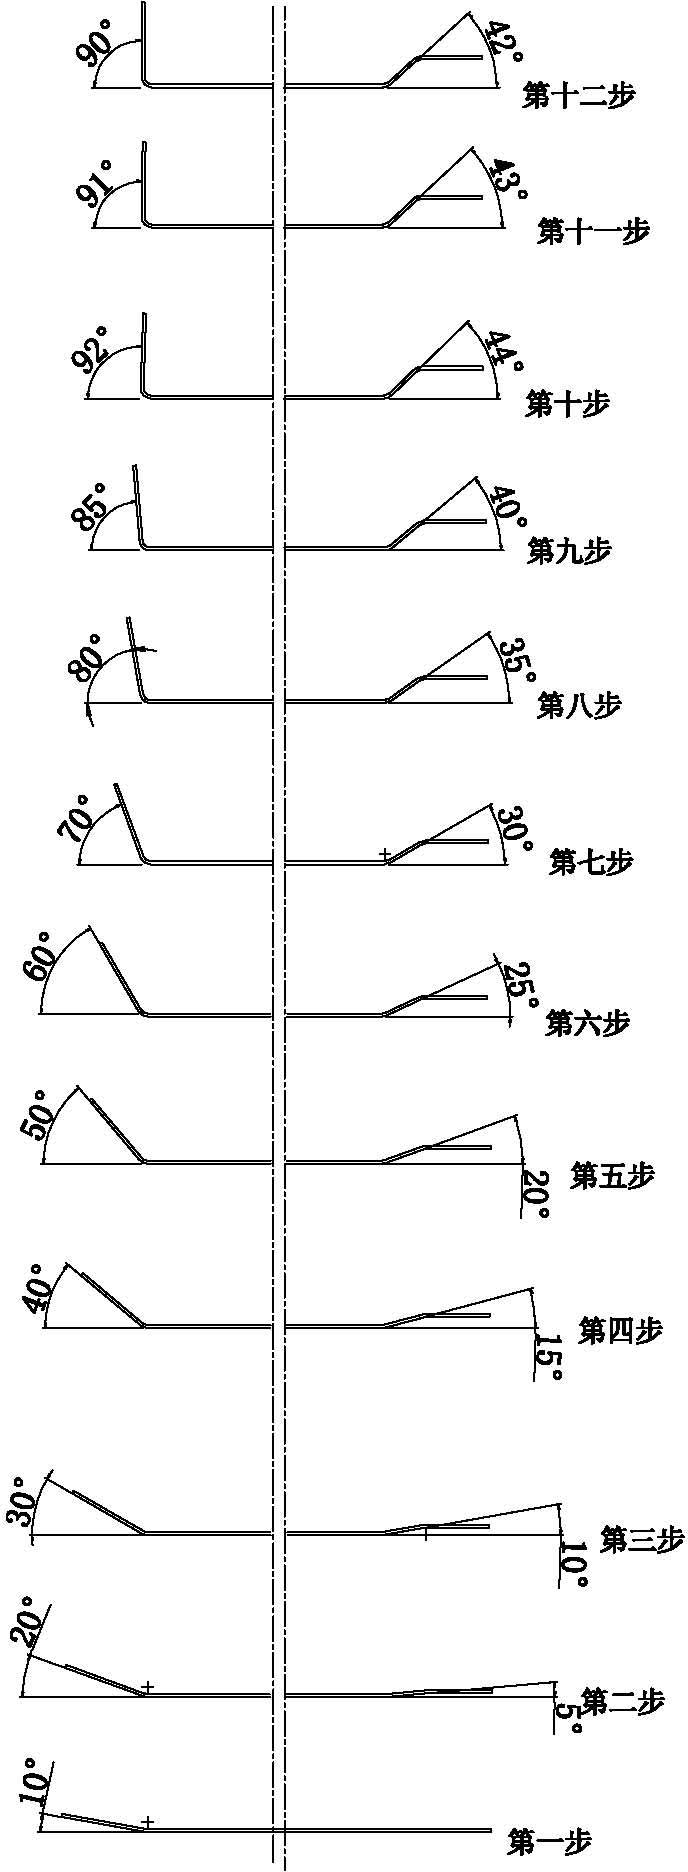 Continuous cold-roll forming method for stainless steel side wall bottom edge beam